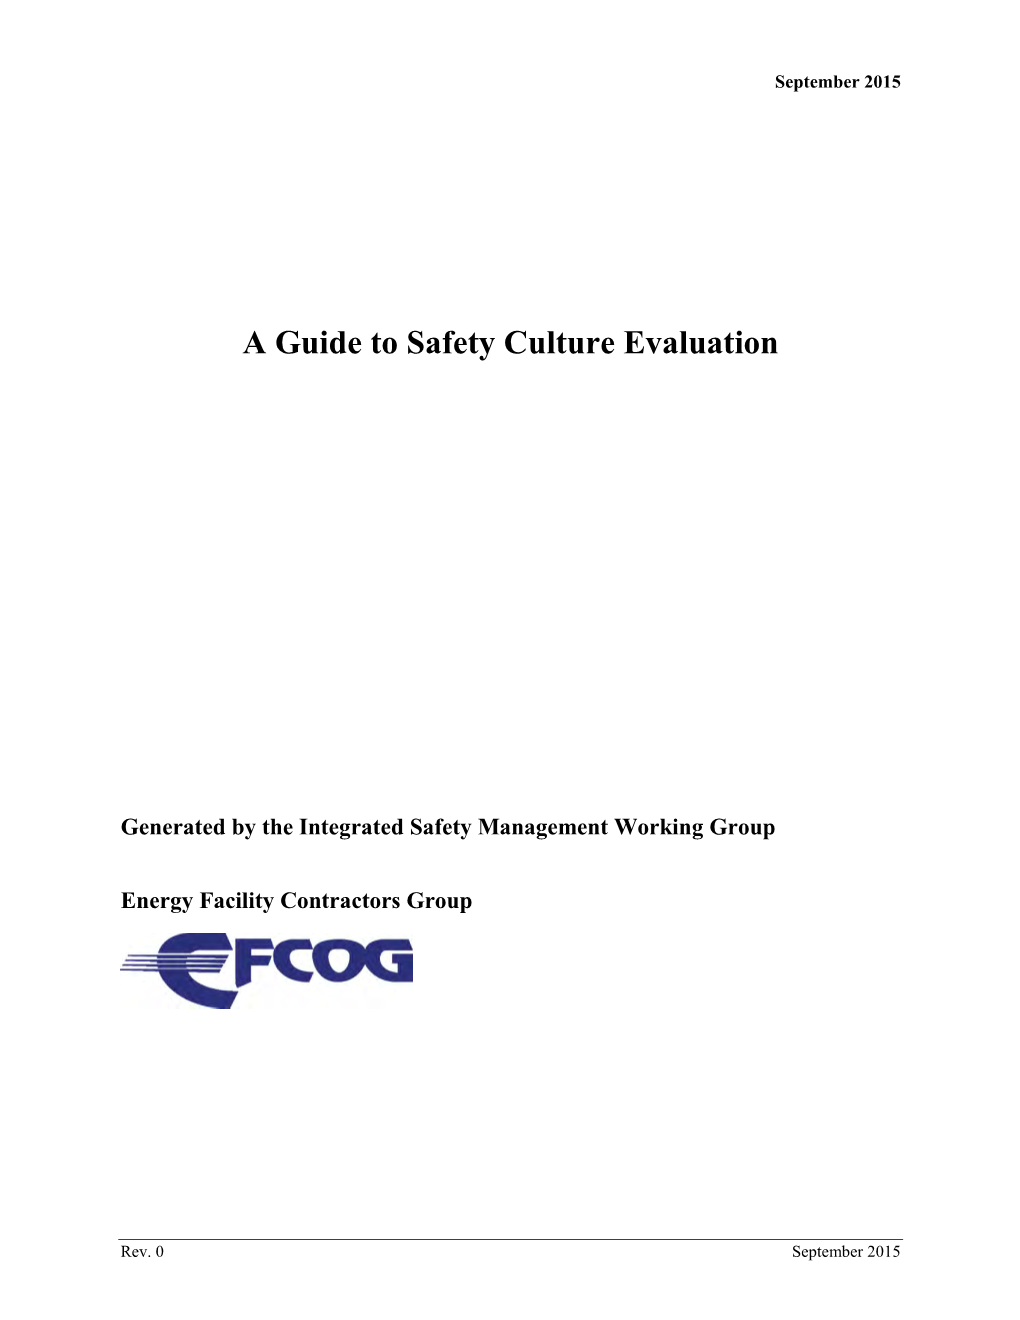 Guide to Safety Culture Evaluation